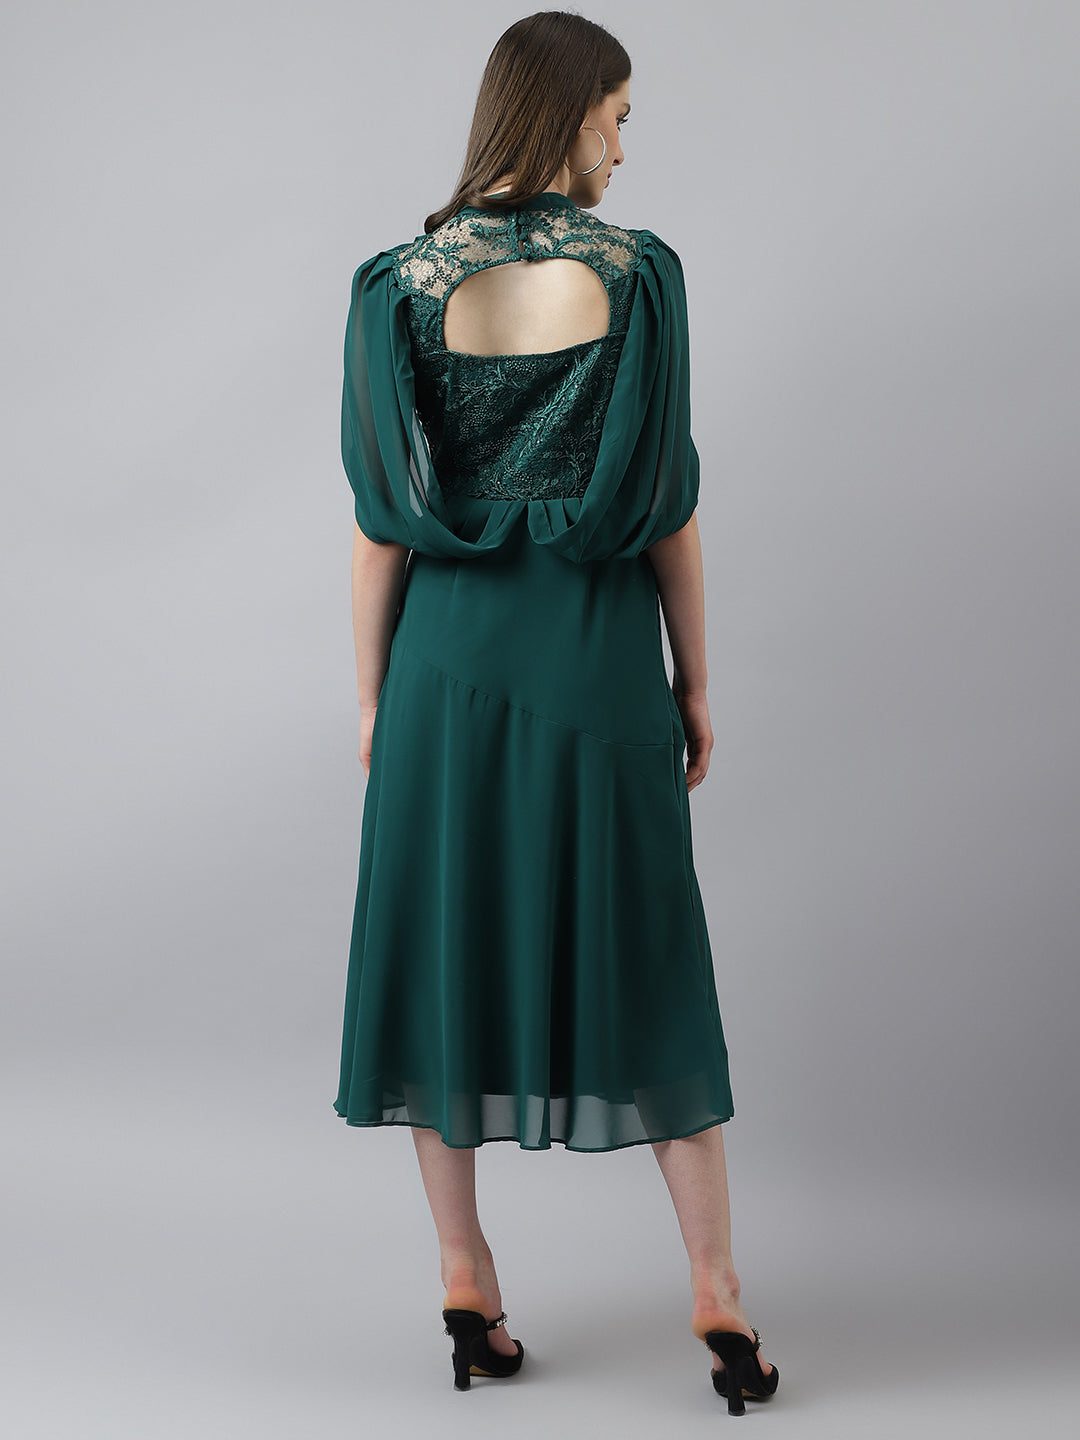 Green A-Line Lace Designer Dress With Cape Sleeves